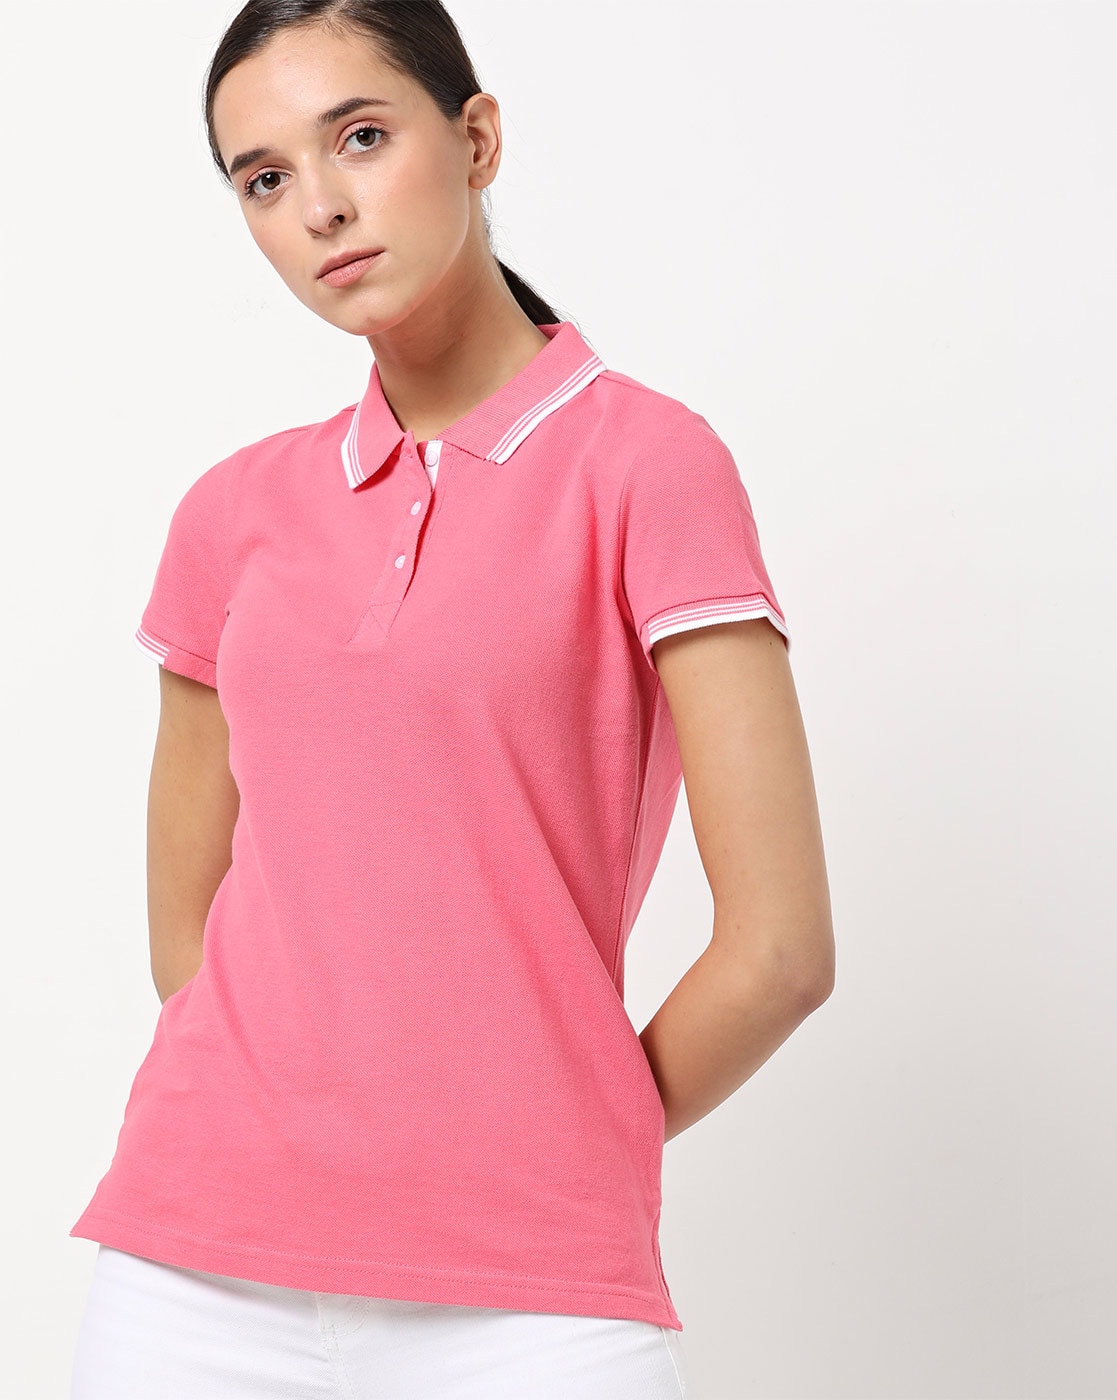 Customized Name Polo Shirt Woman Power Pink Fight And Strong Polo Shirt For Men And Woman Kleding Herenkleding Overhemden & T-shirts Polos 